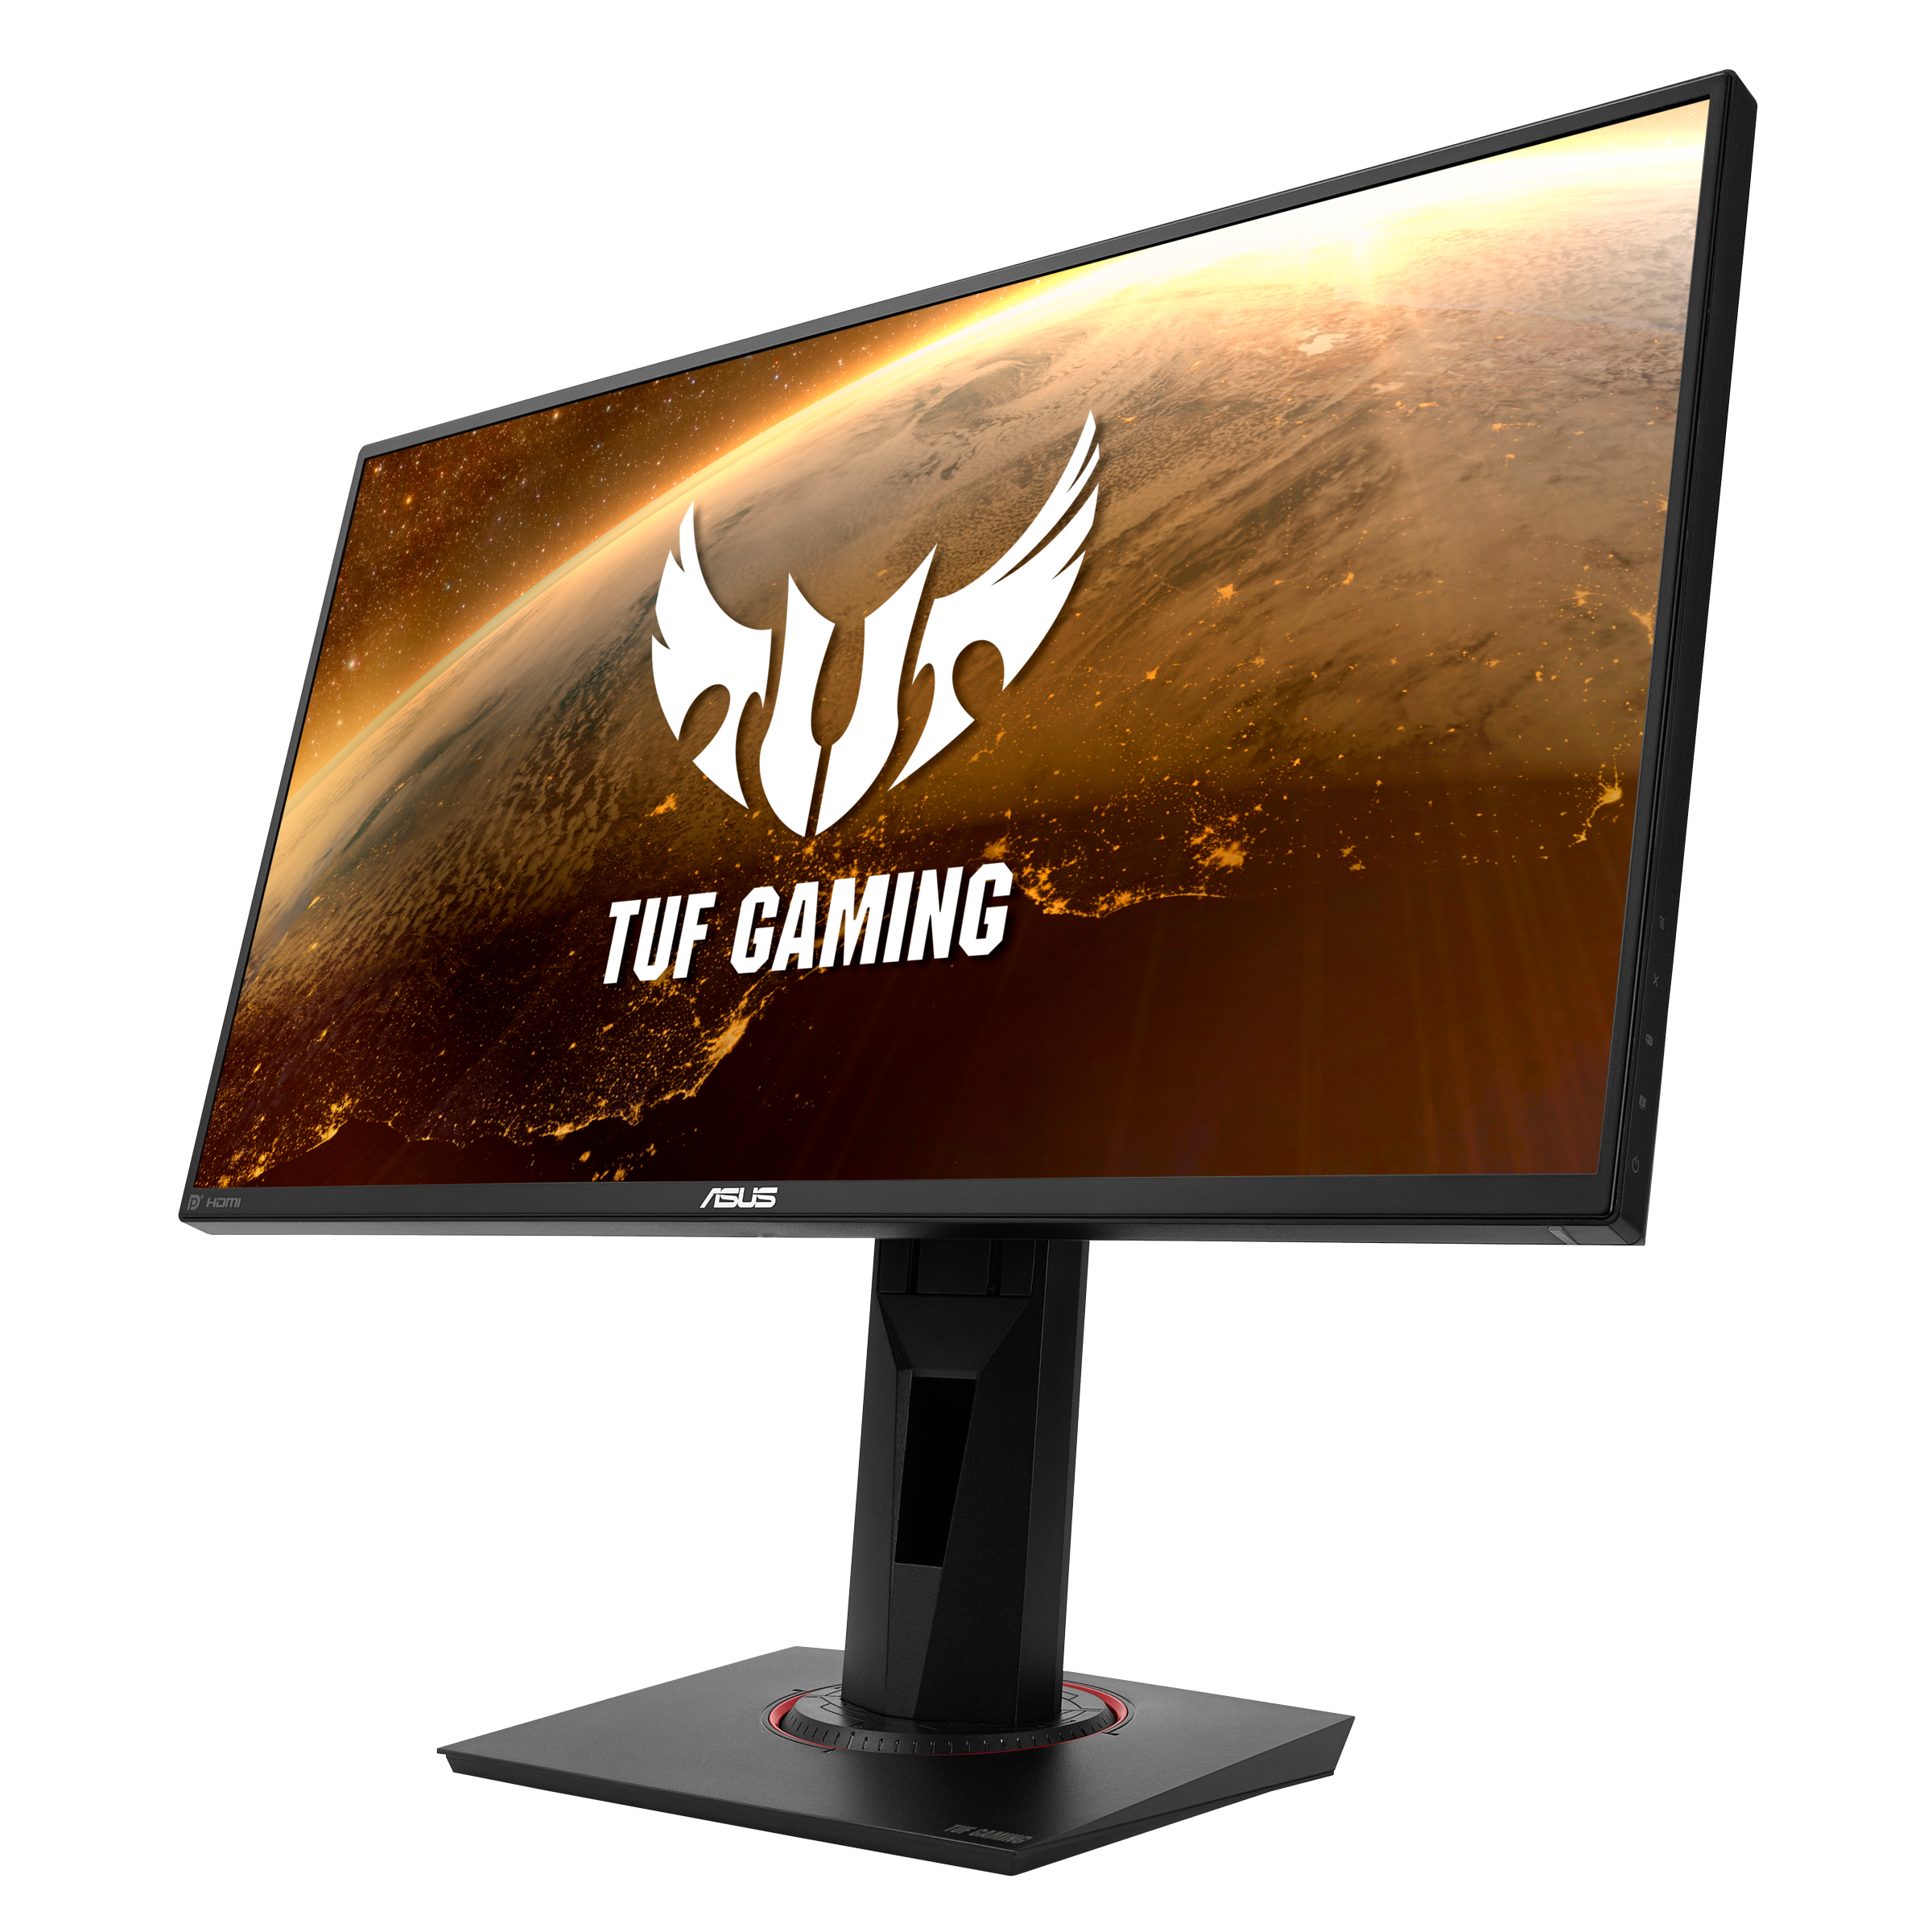 Angled view of the Asus TUF Gaming VG259QR monitor